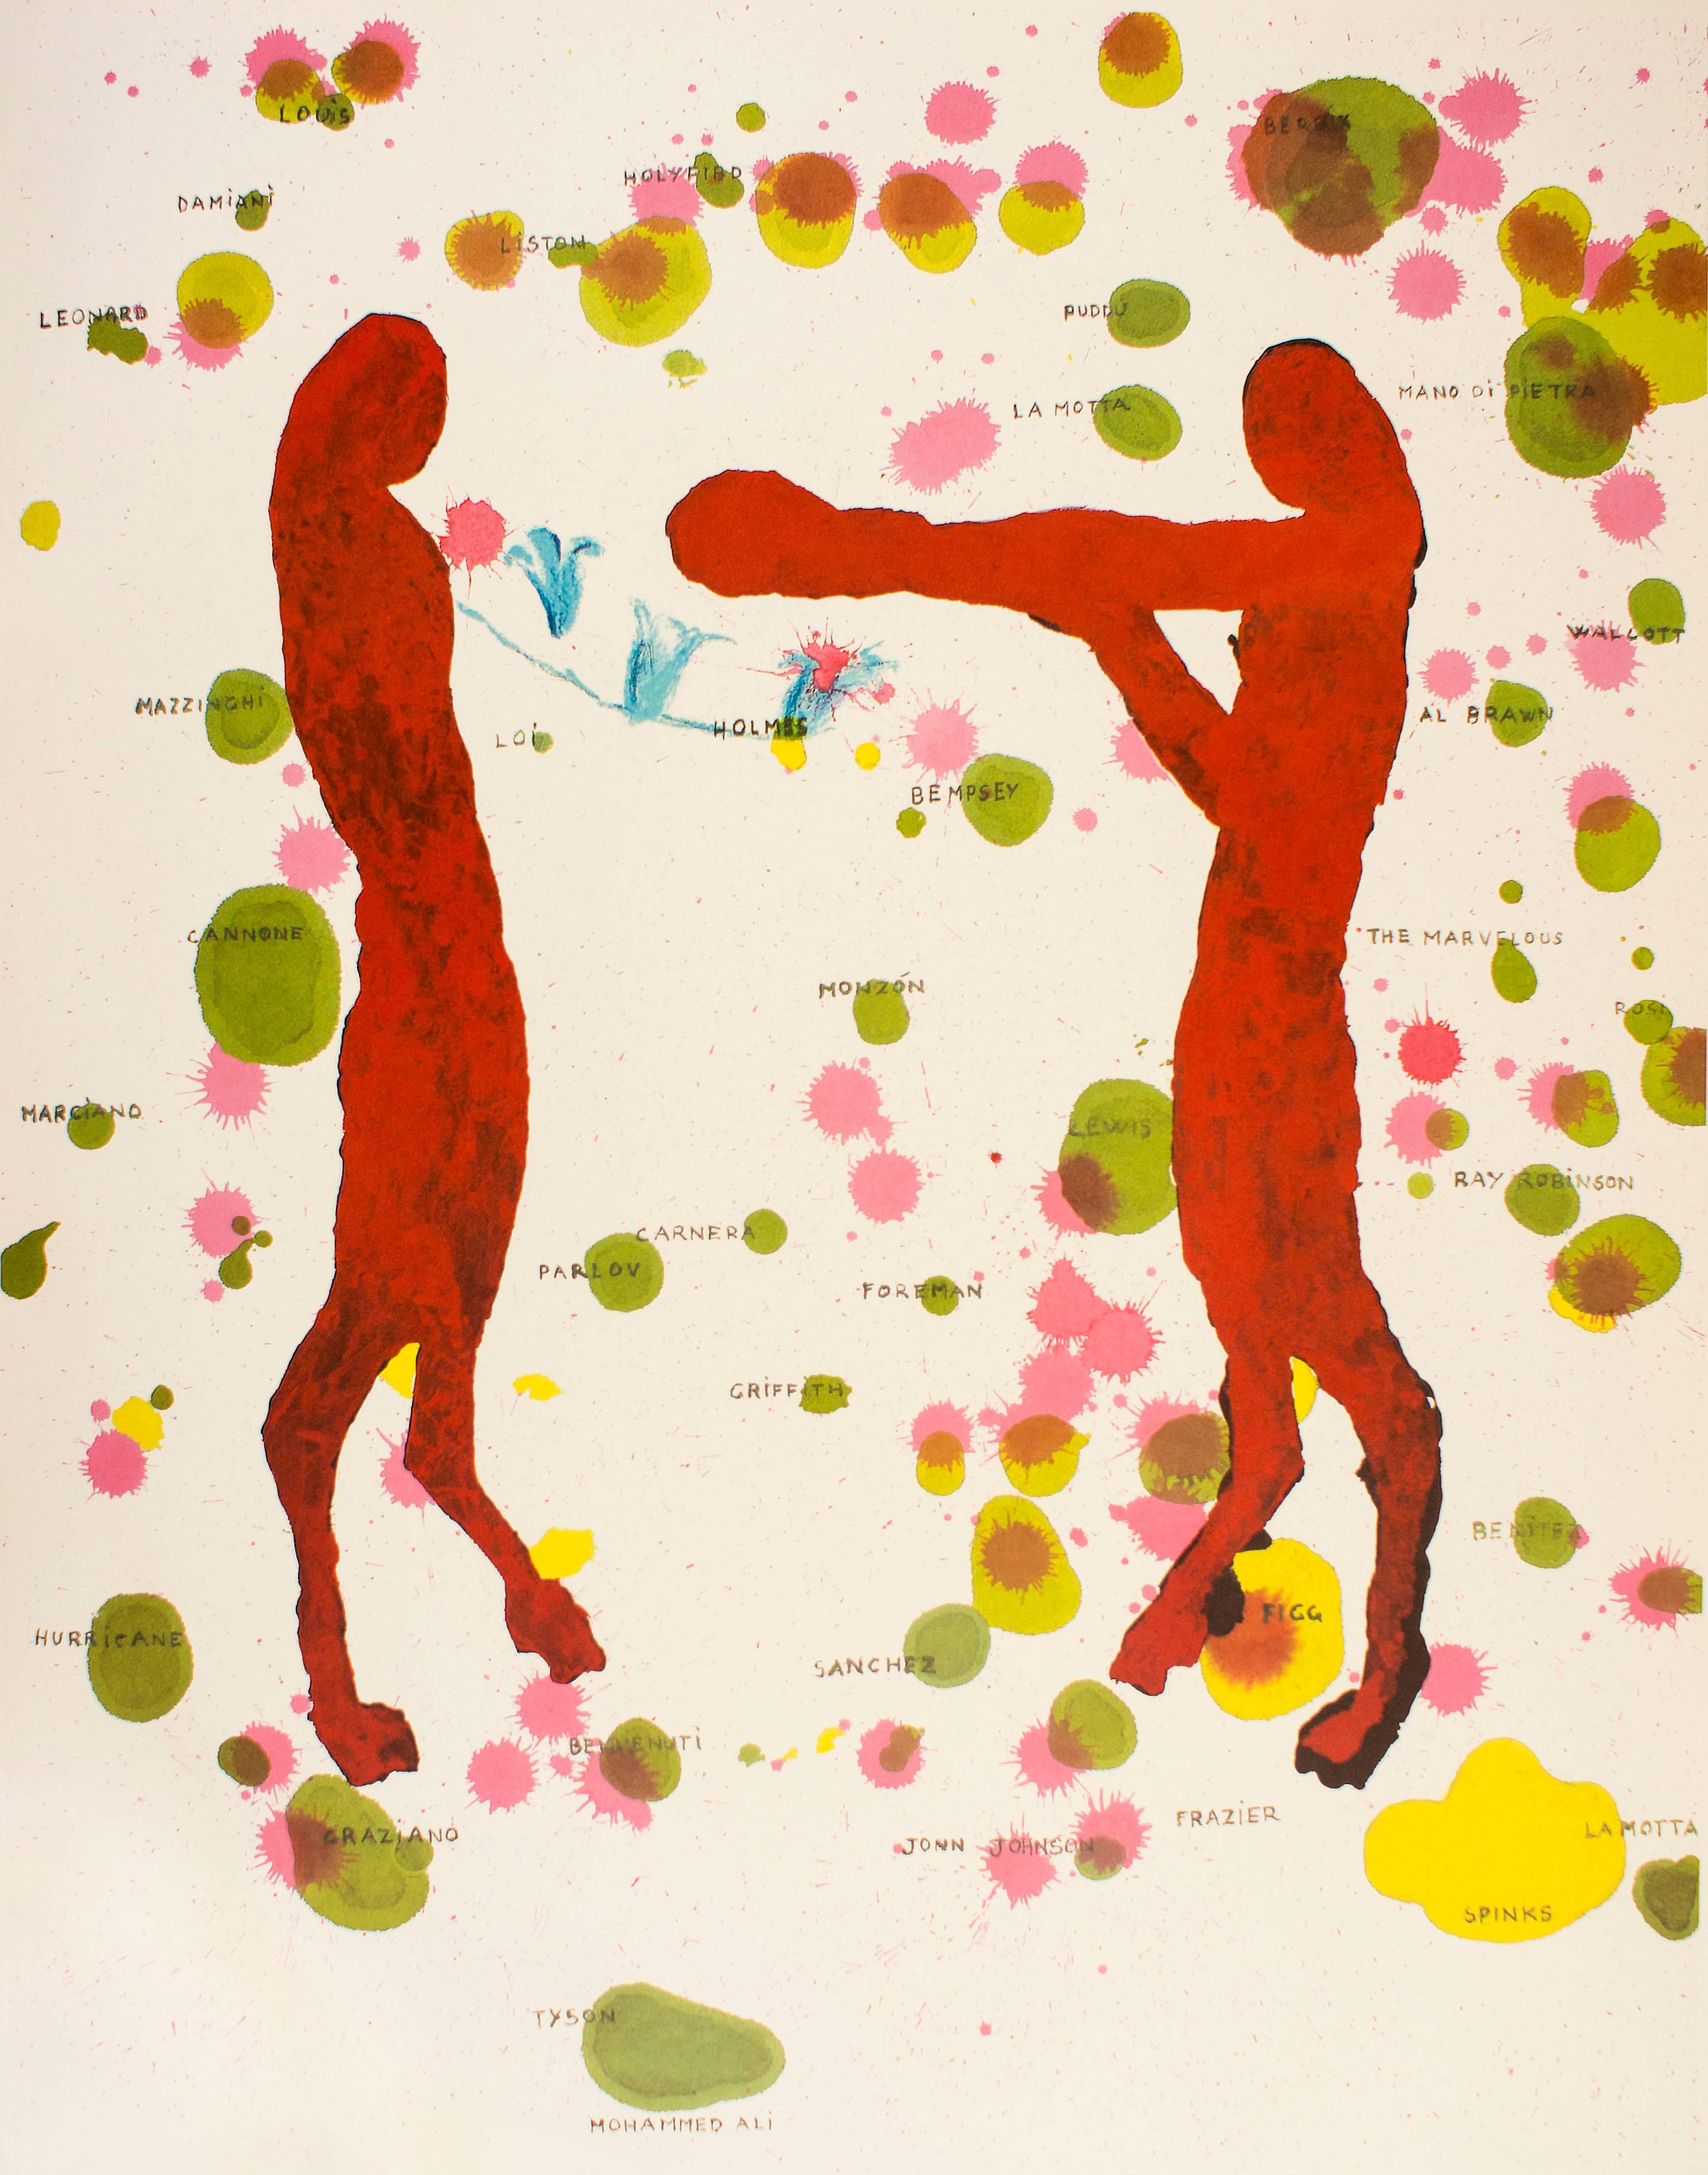 Giuseppe Gallo Abstract Print - Boxers, Olympic Games Beijing 2008